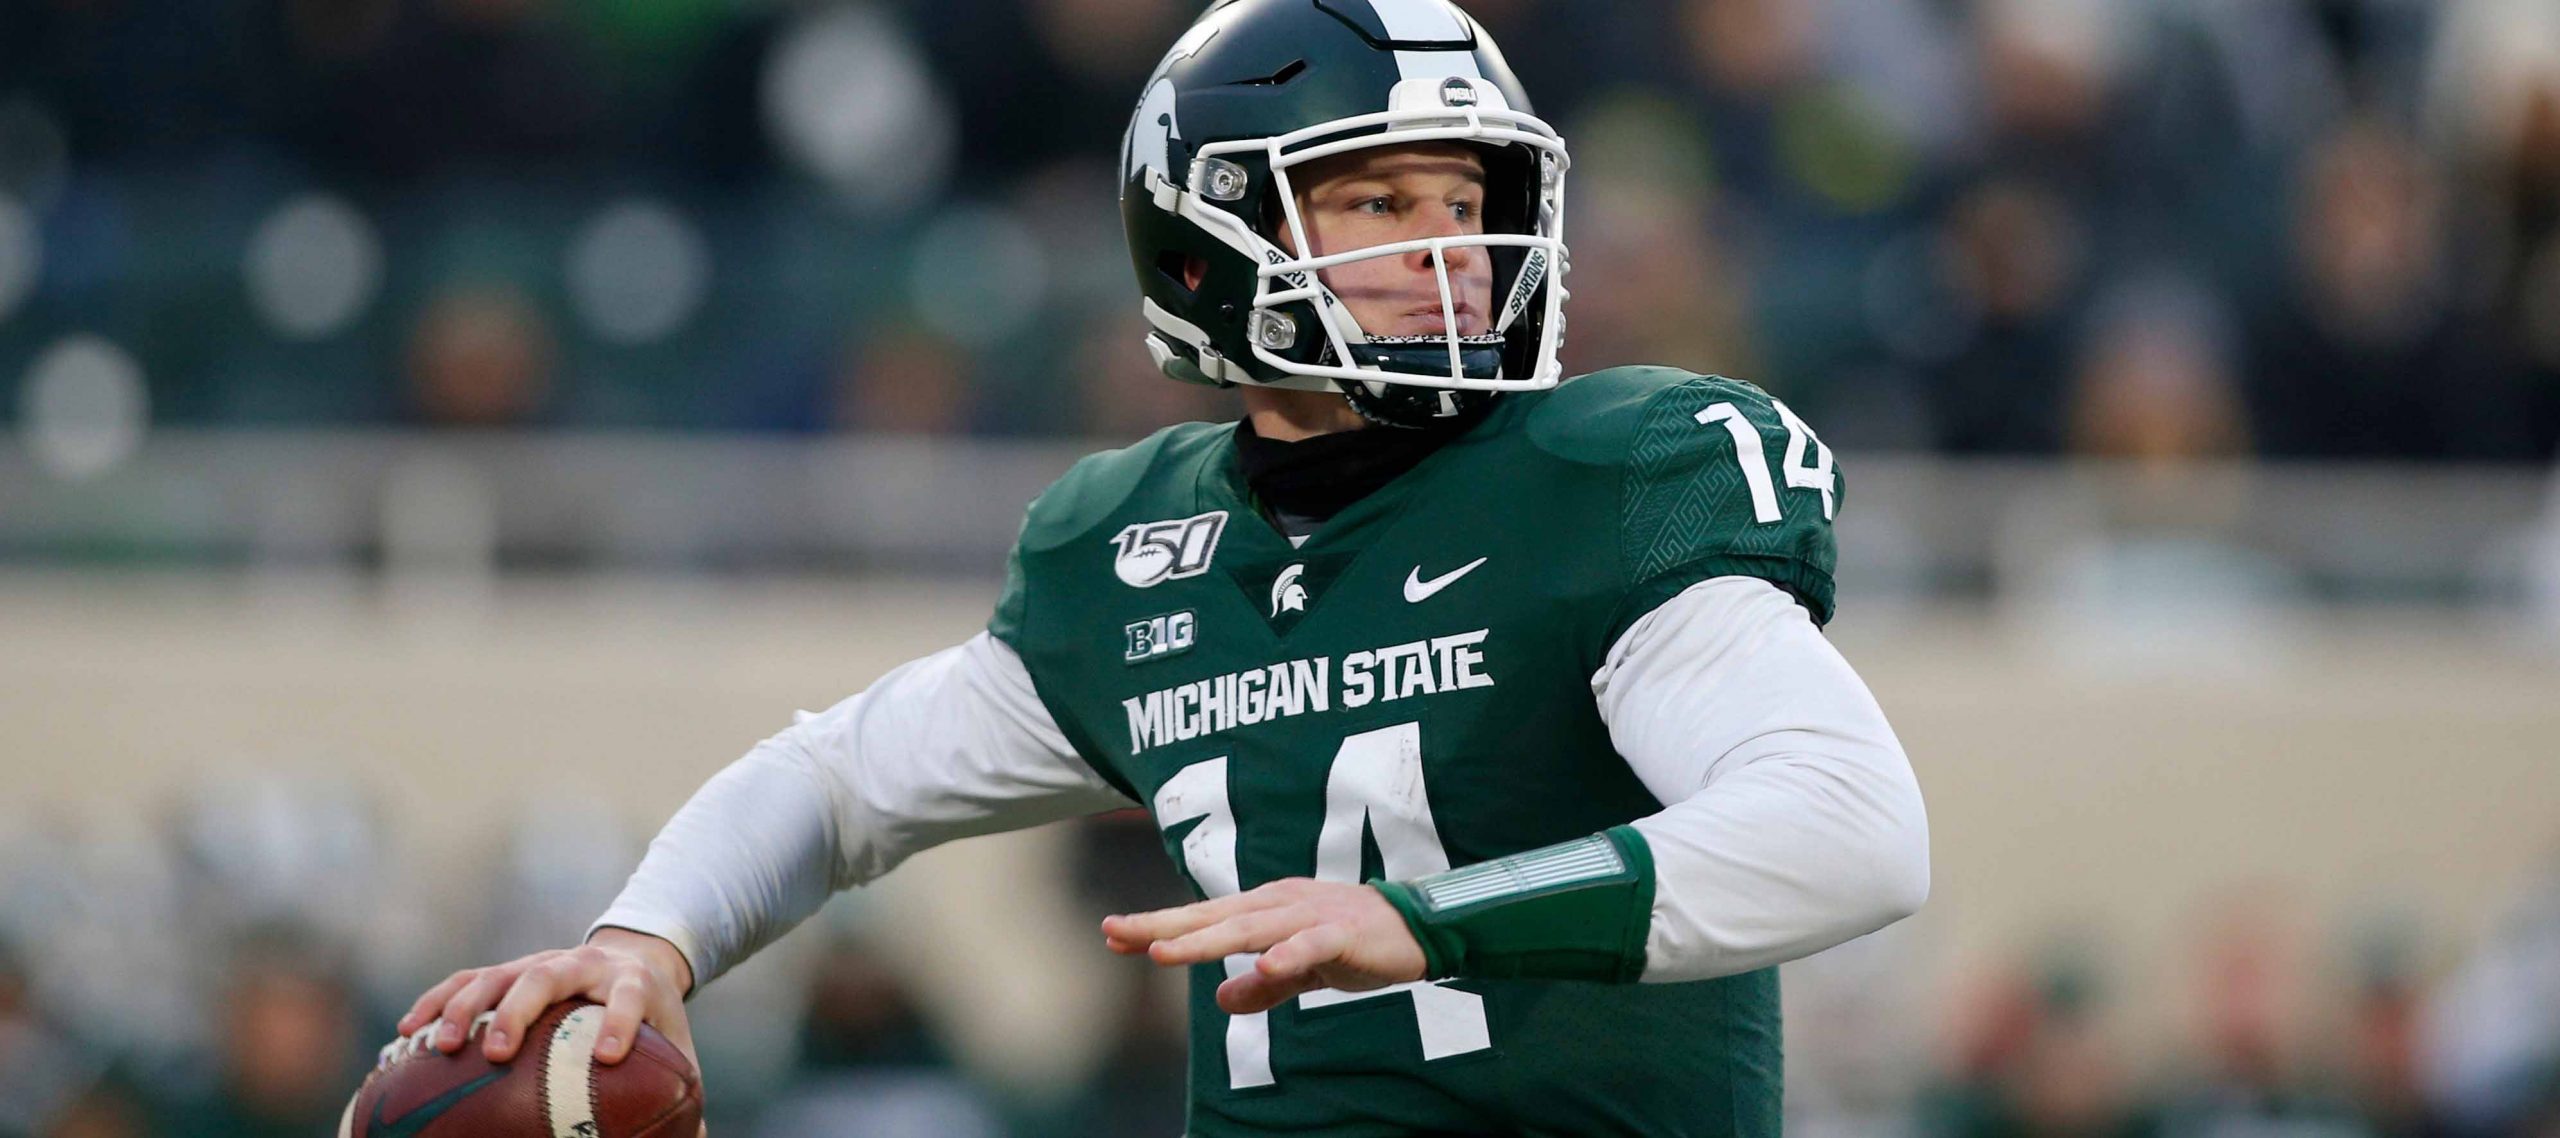 #6 Michigan vs #8 Michigan State NCAAF Odds Overview & Predictions